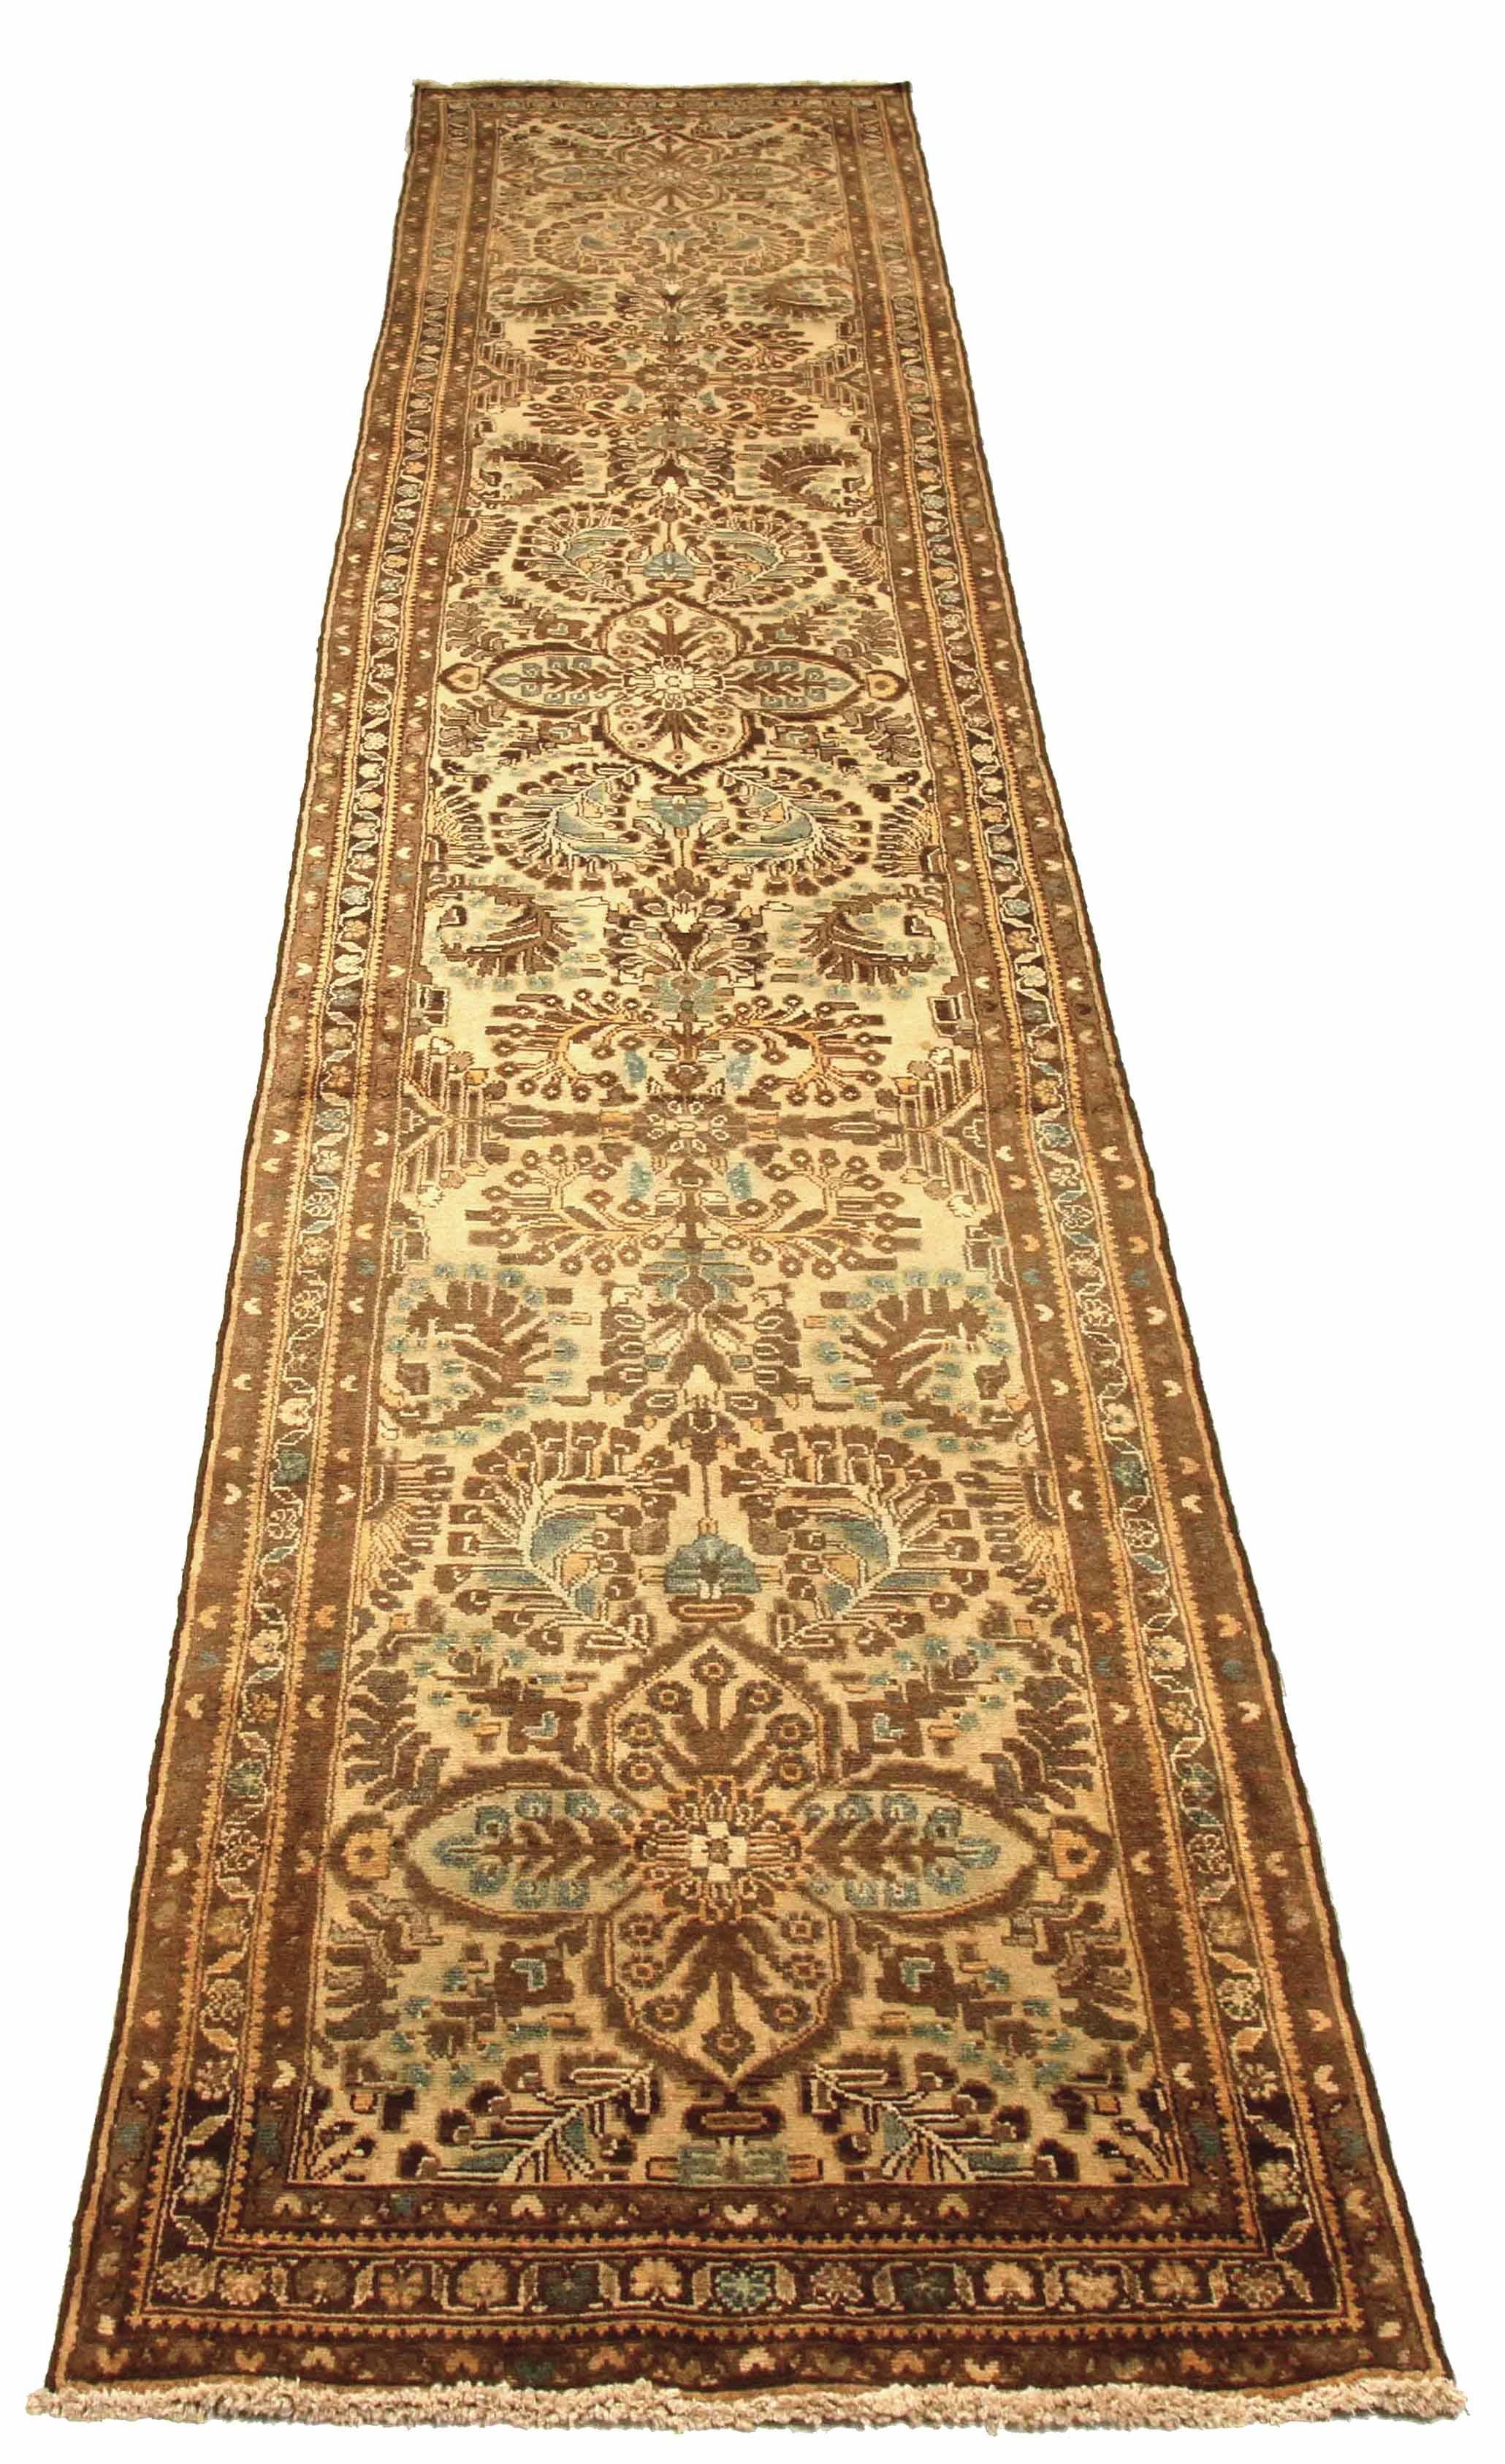 Antique Persian runner rug handwoven from the finest sheep’s wool. It’s colored with all-natural vegetable dyes that are safe for humans and pets. It’s a traditional Azarbaijan design handwoven by expert artisans. It’s a lovely runner rug that can